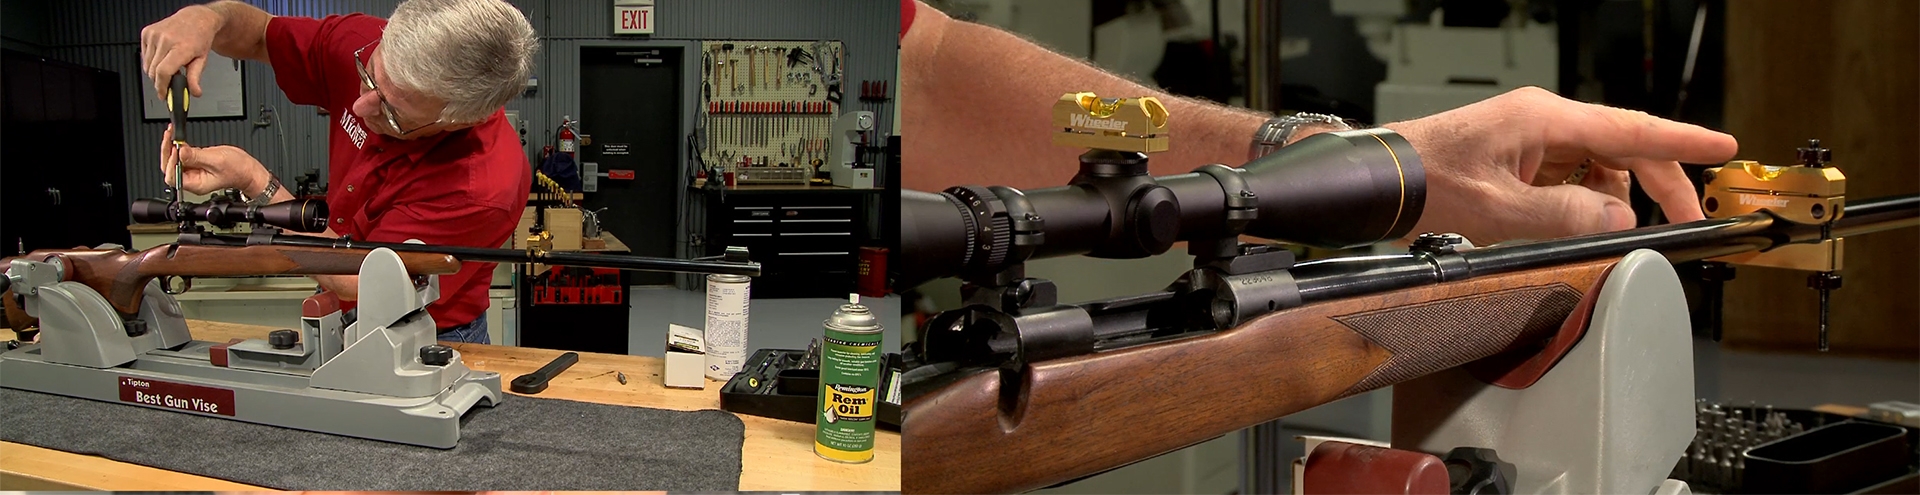 Image relating to How to Properly Mount a Scope